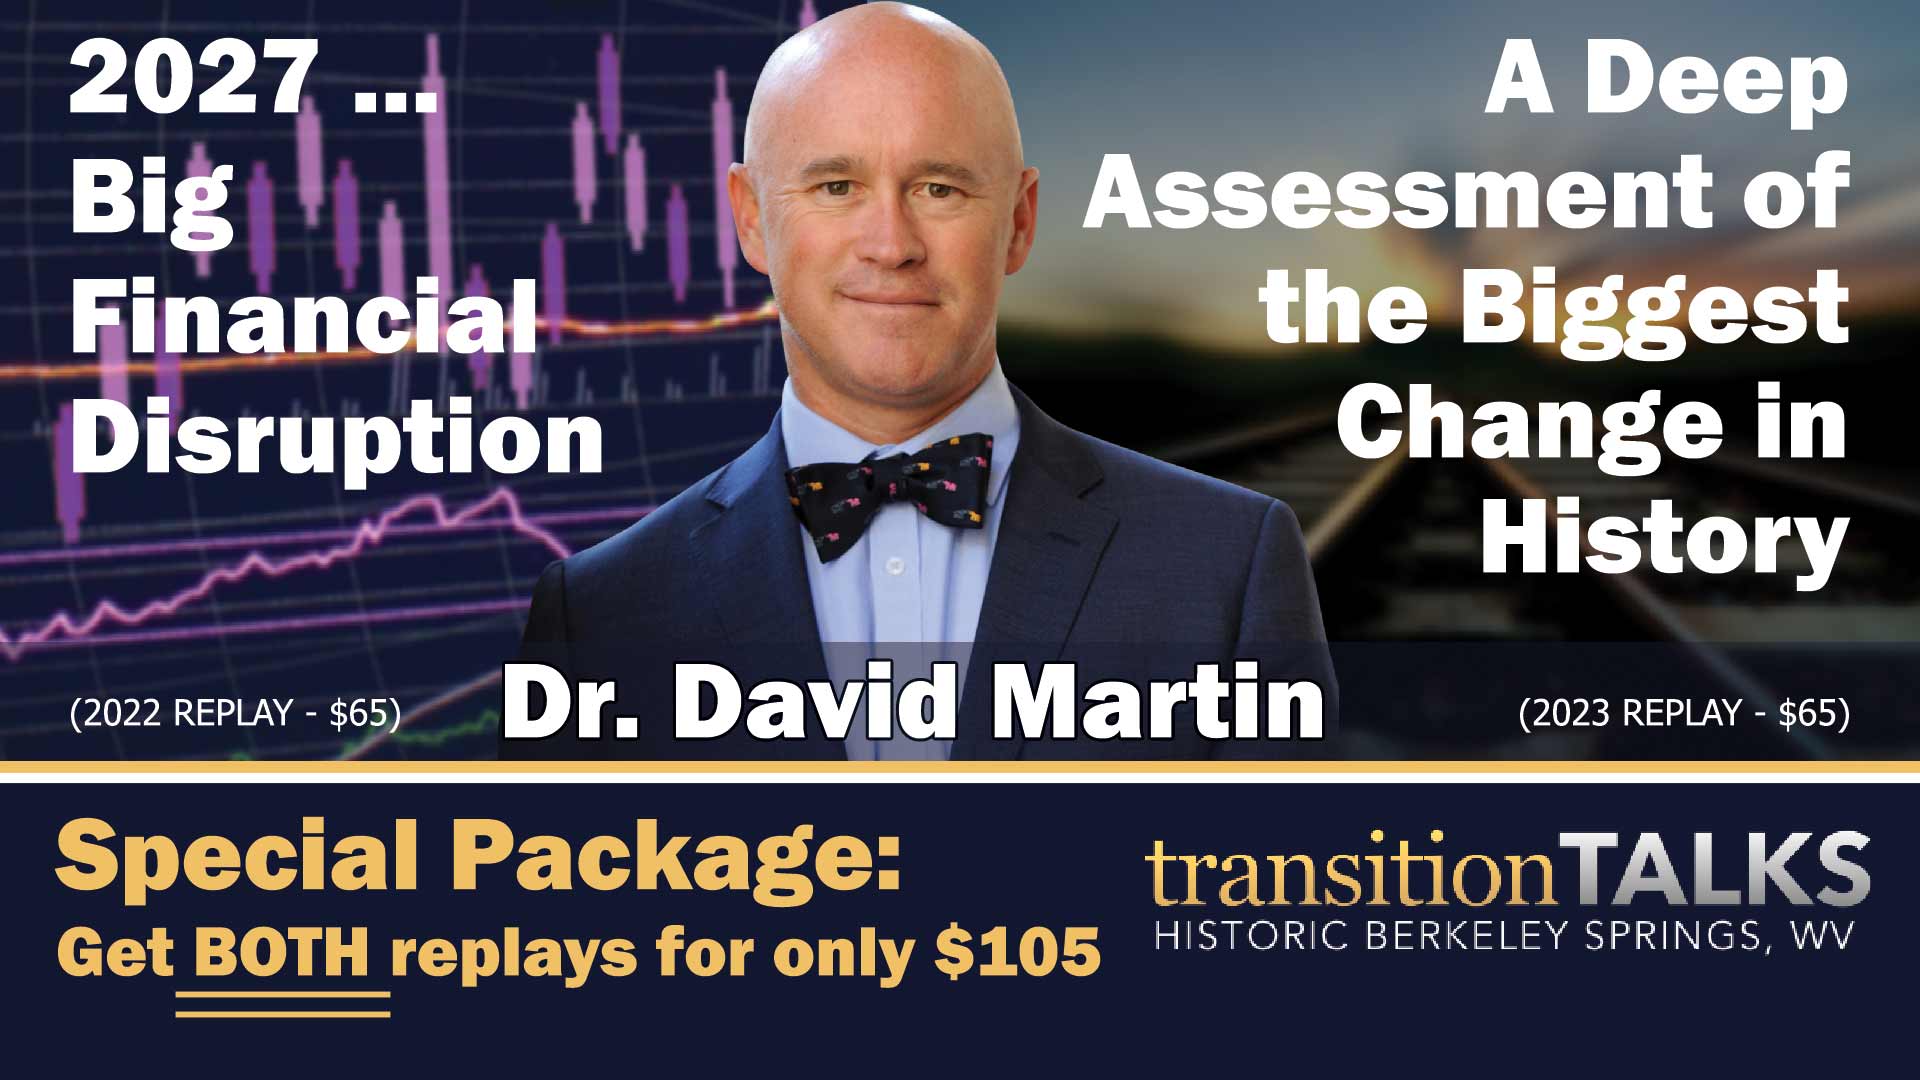 Dr. David Martin special package, two presentations for one special price